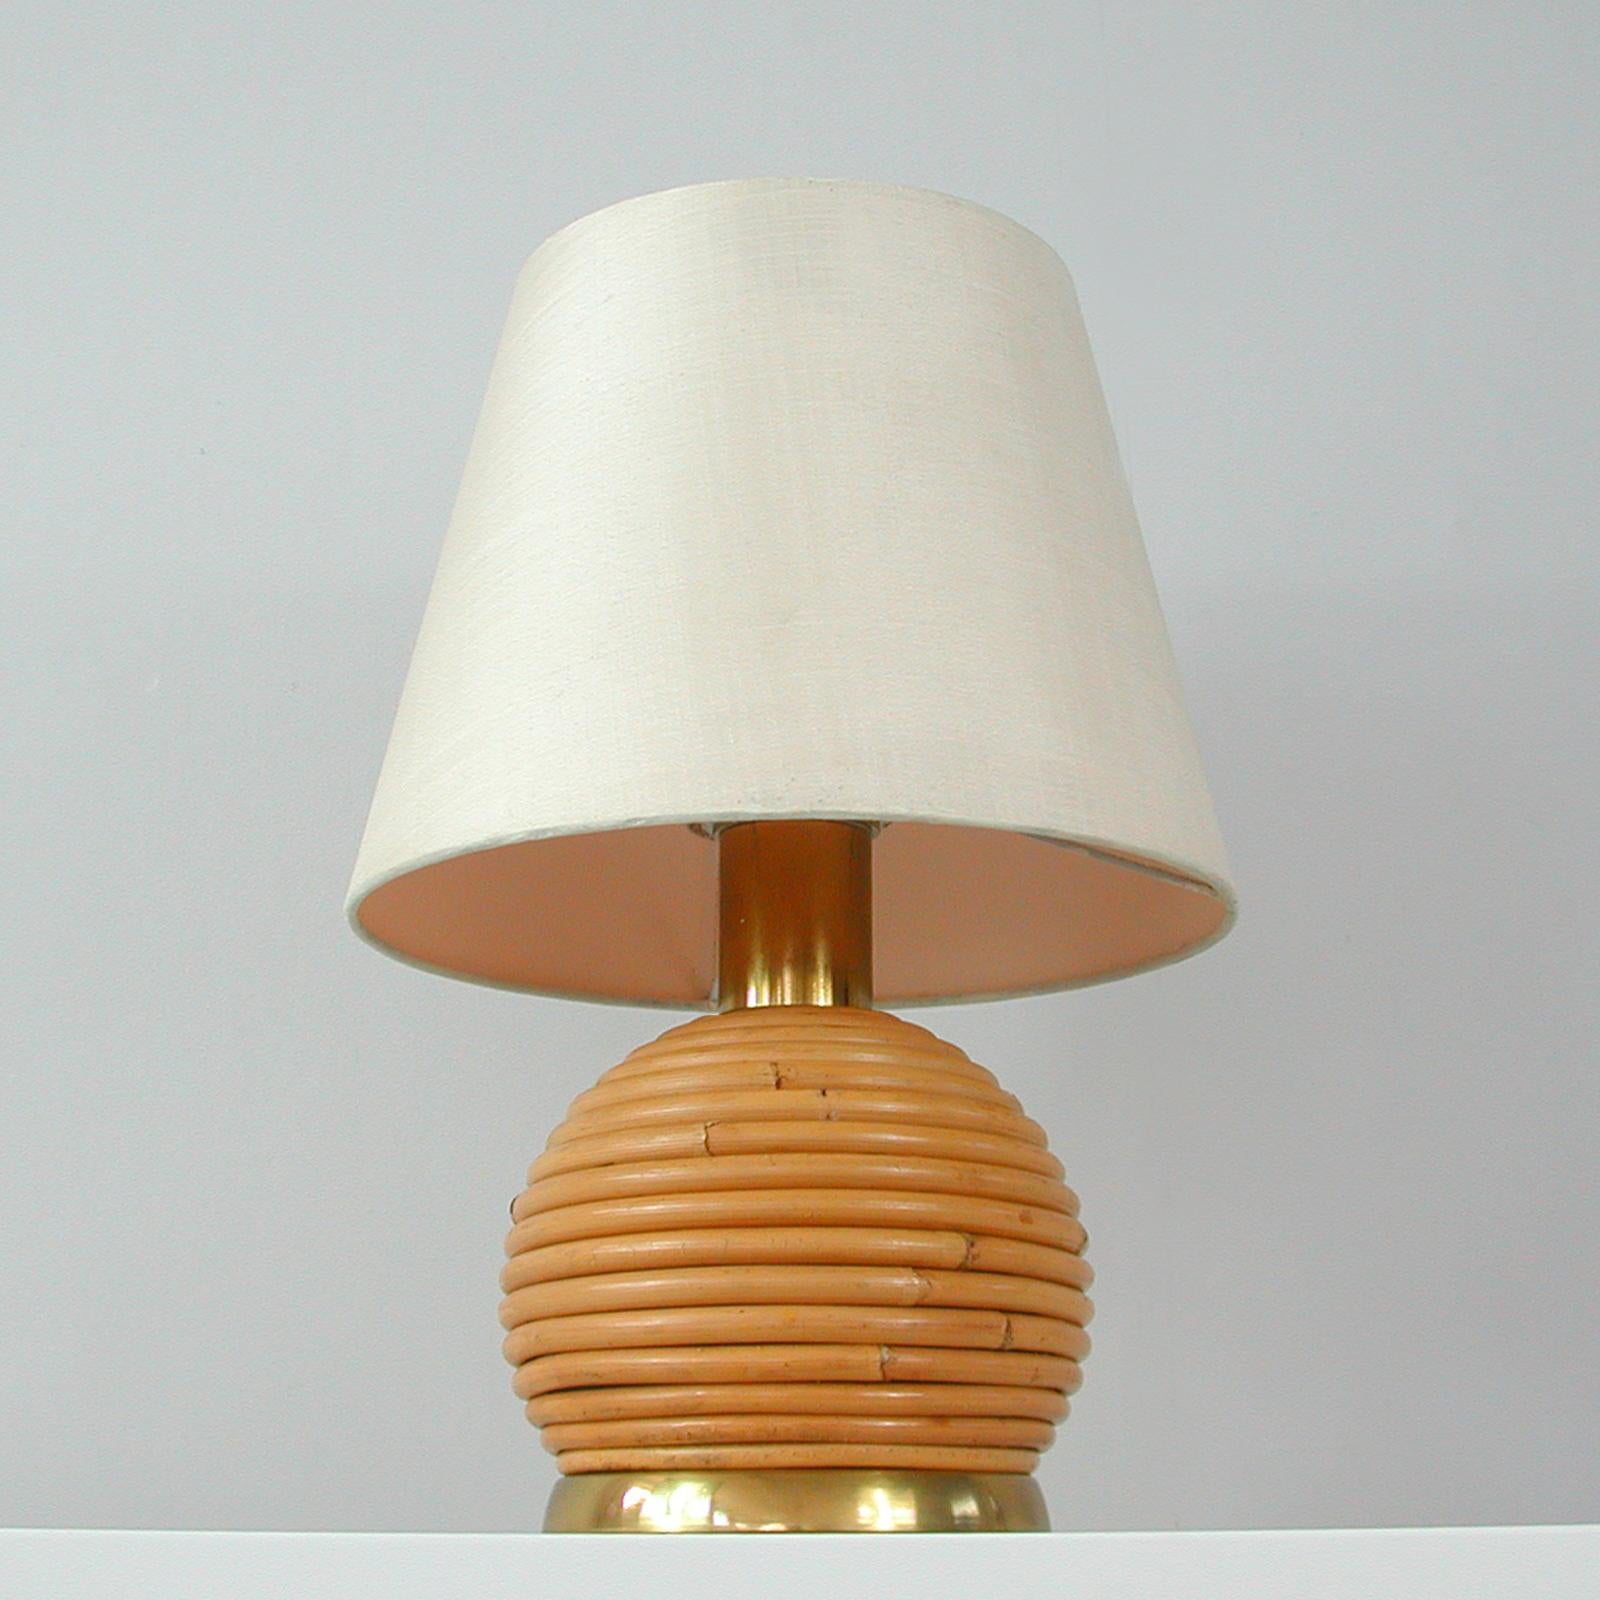 Italian Midcentury Bamboo and Brass Globe Table Lamp, Vivai del Sud attr. Italy 1960s For Sale